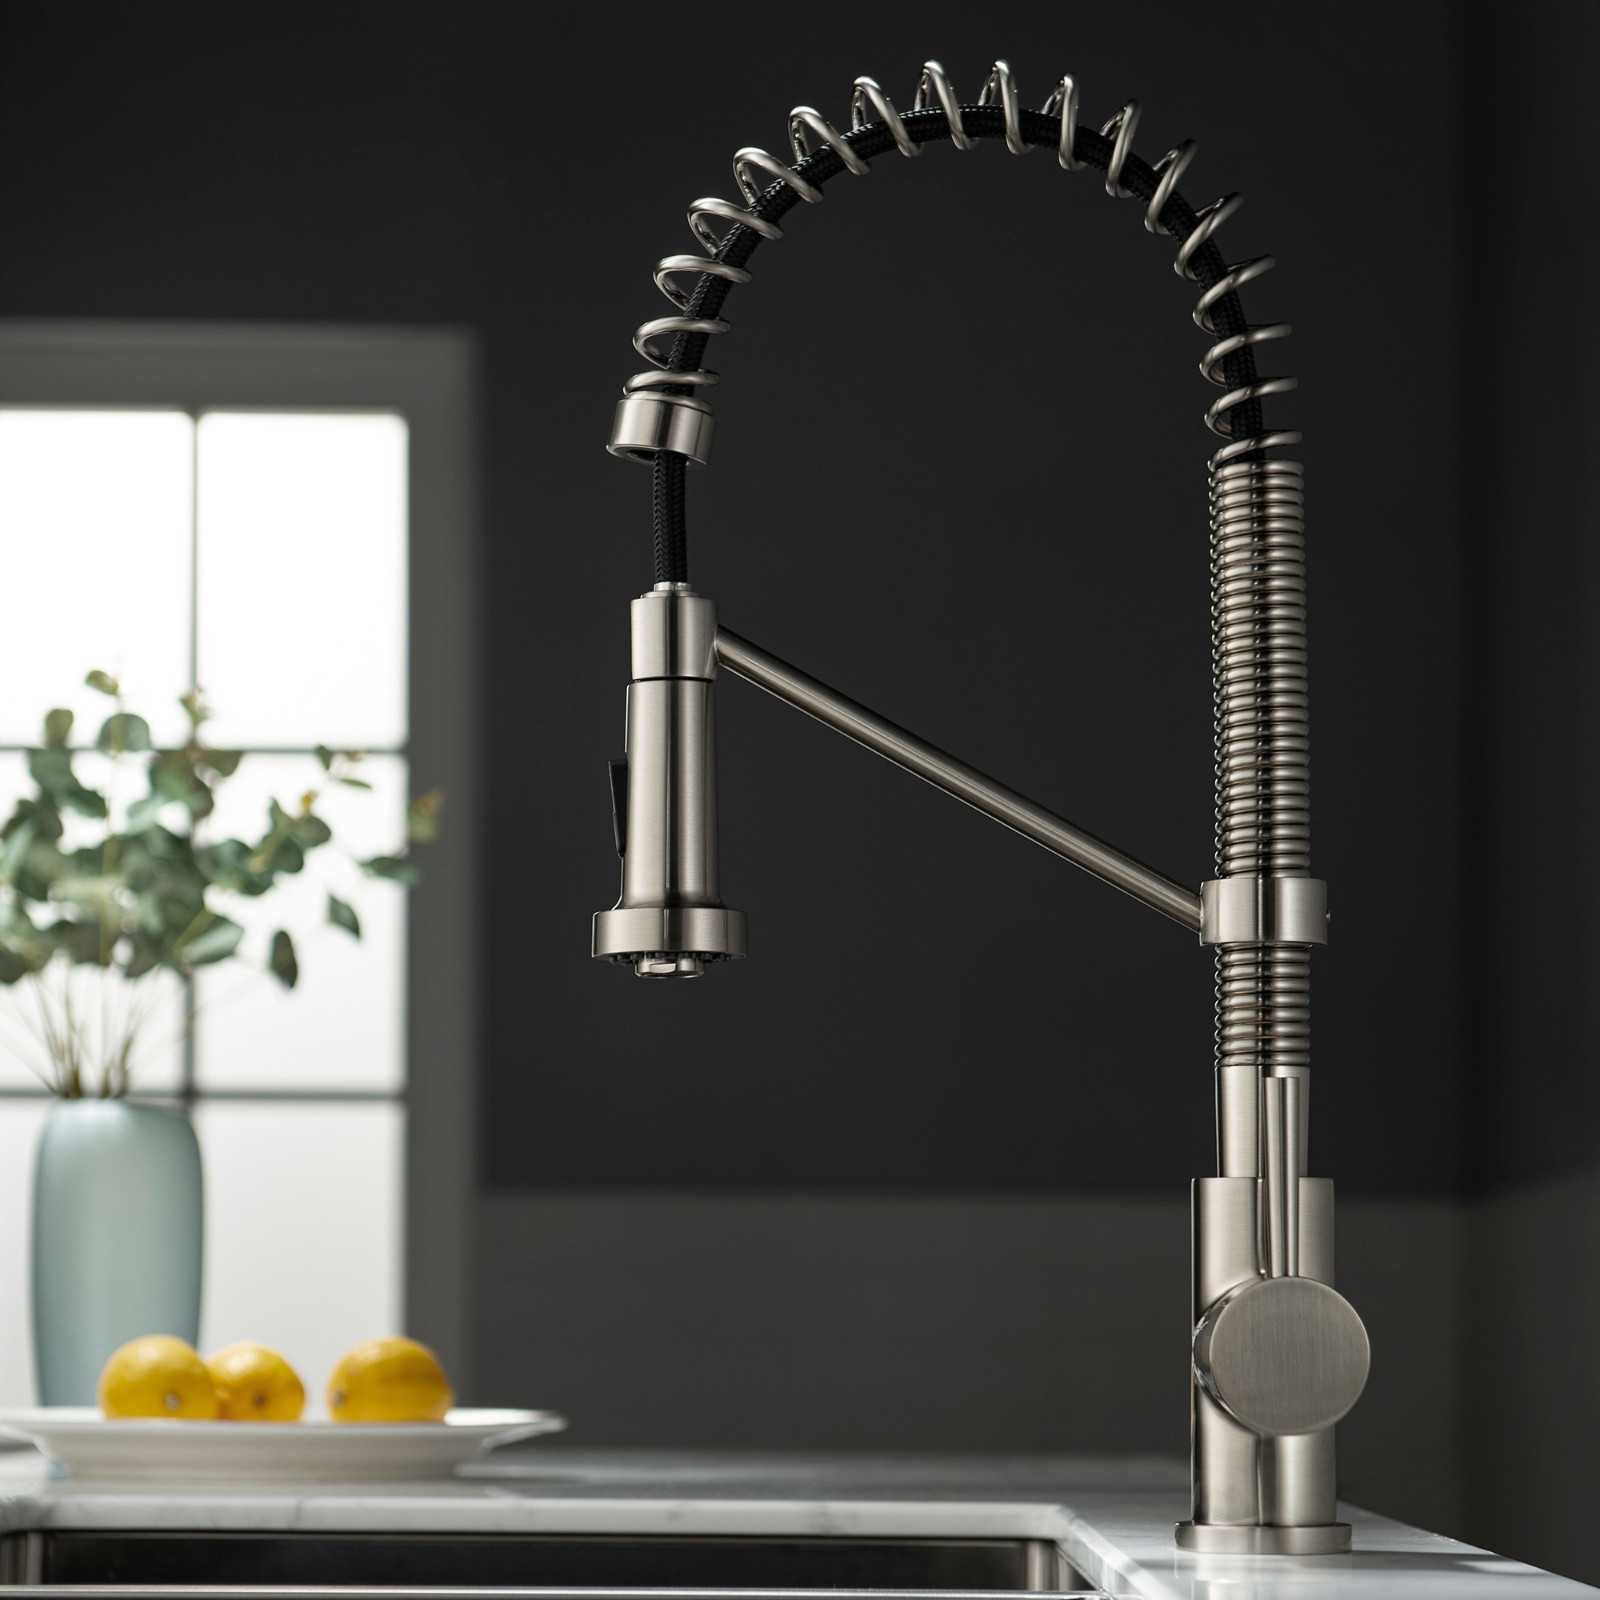  WOODBRIDGE WK010203BN Stainless Steel Single Handle Spring Coil Pre-Rinse Kitchen Faucet with Pull Down Sprayer, Brushed Nickel Finish_9465